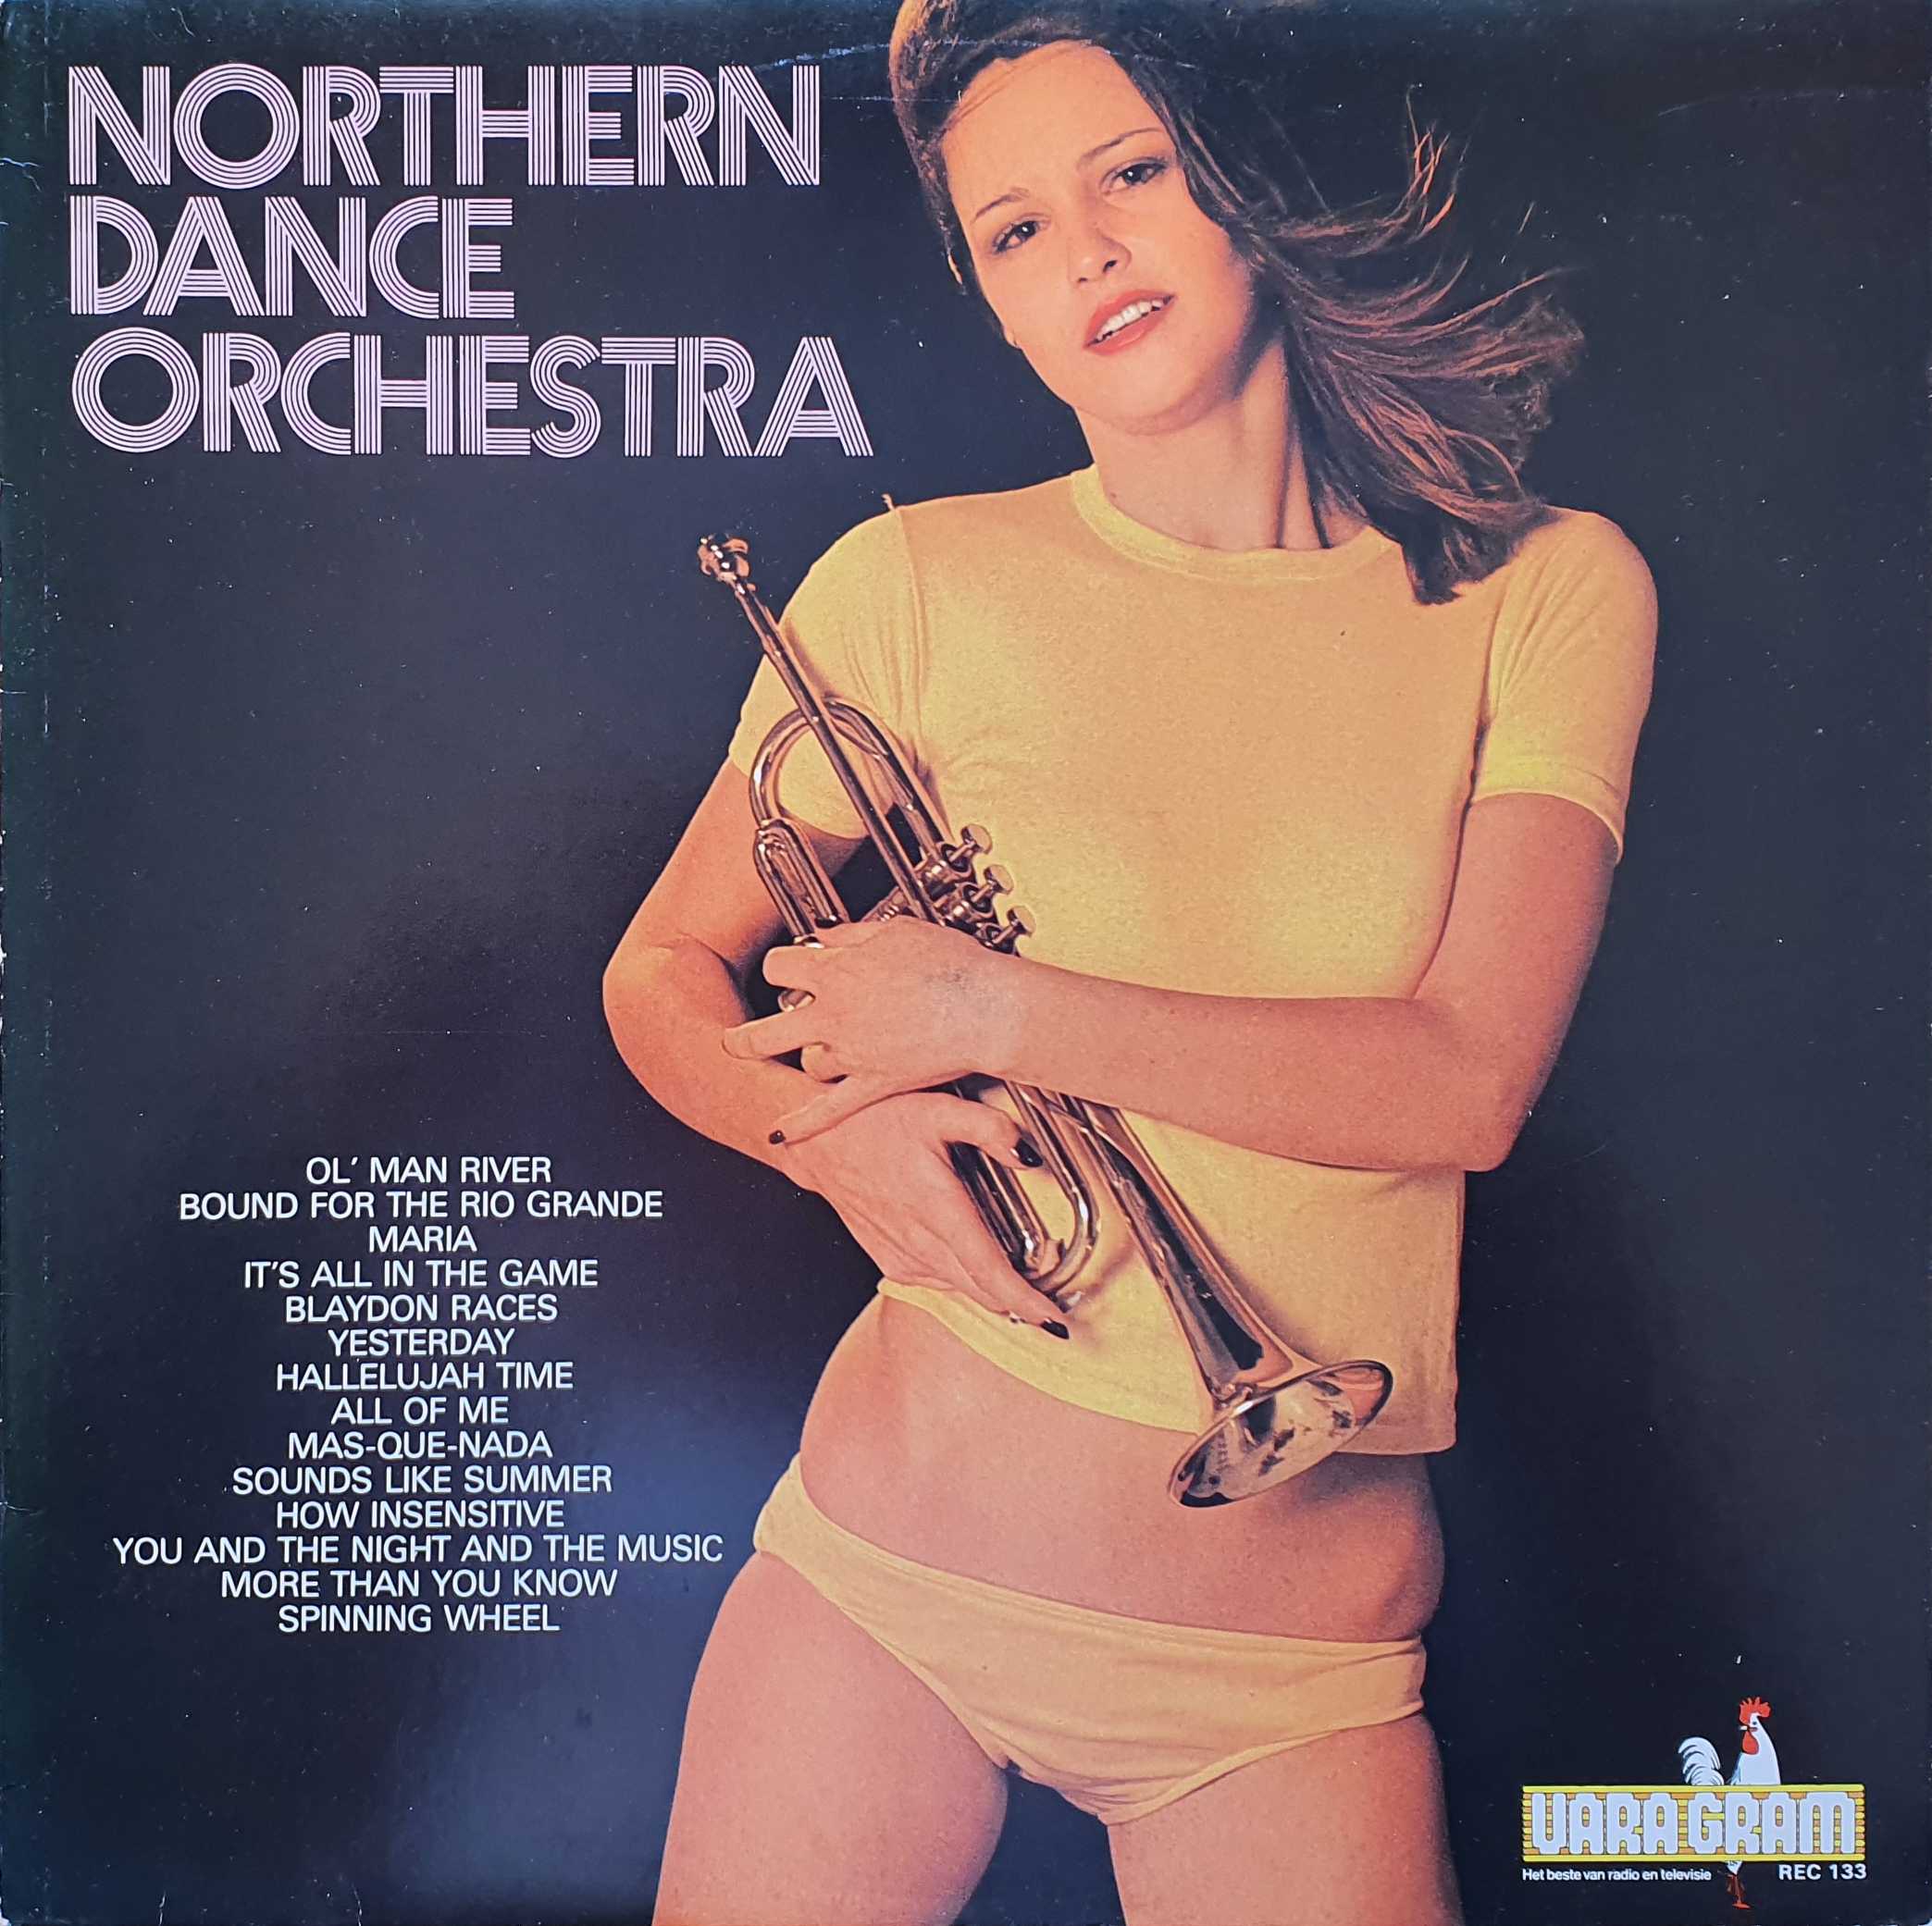 Picture of Northern dance orchestra by artist Various from the BBC albums - Records and Tapes library